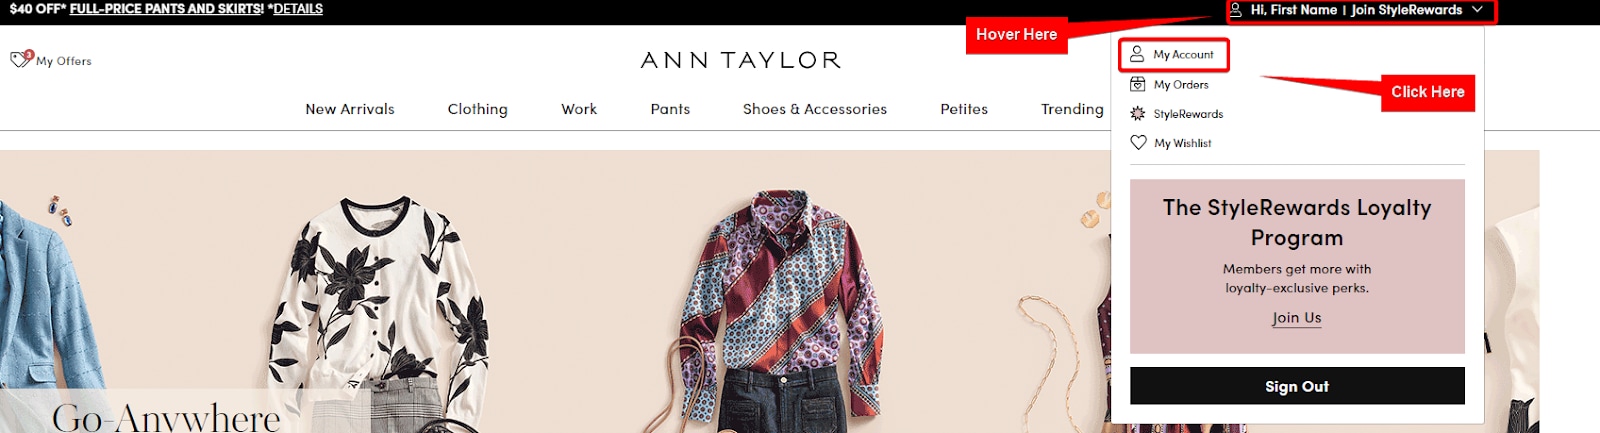 How to Ship Ann Taylor Internationally in 3 Easy Steps 1